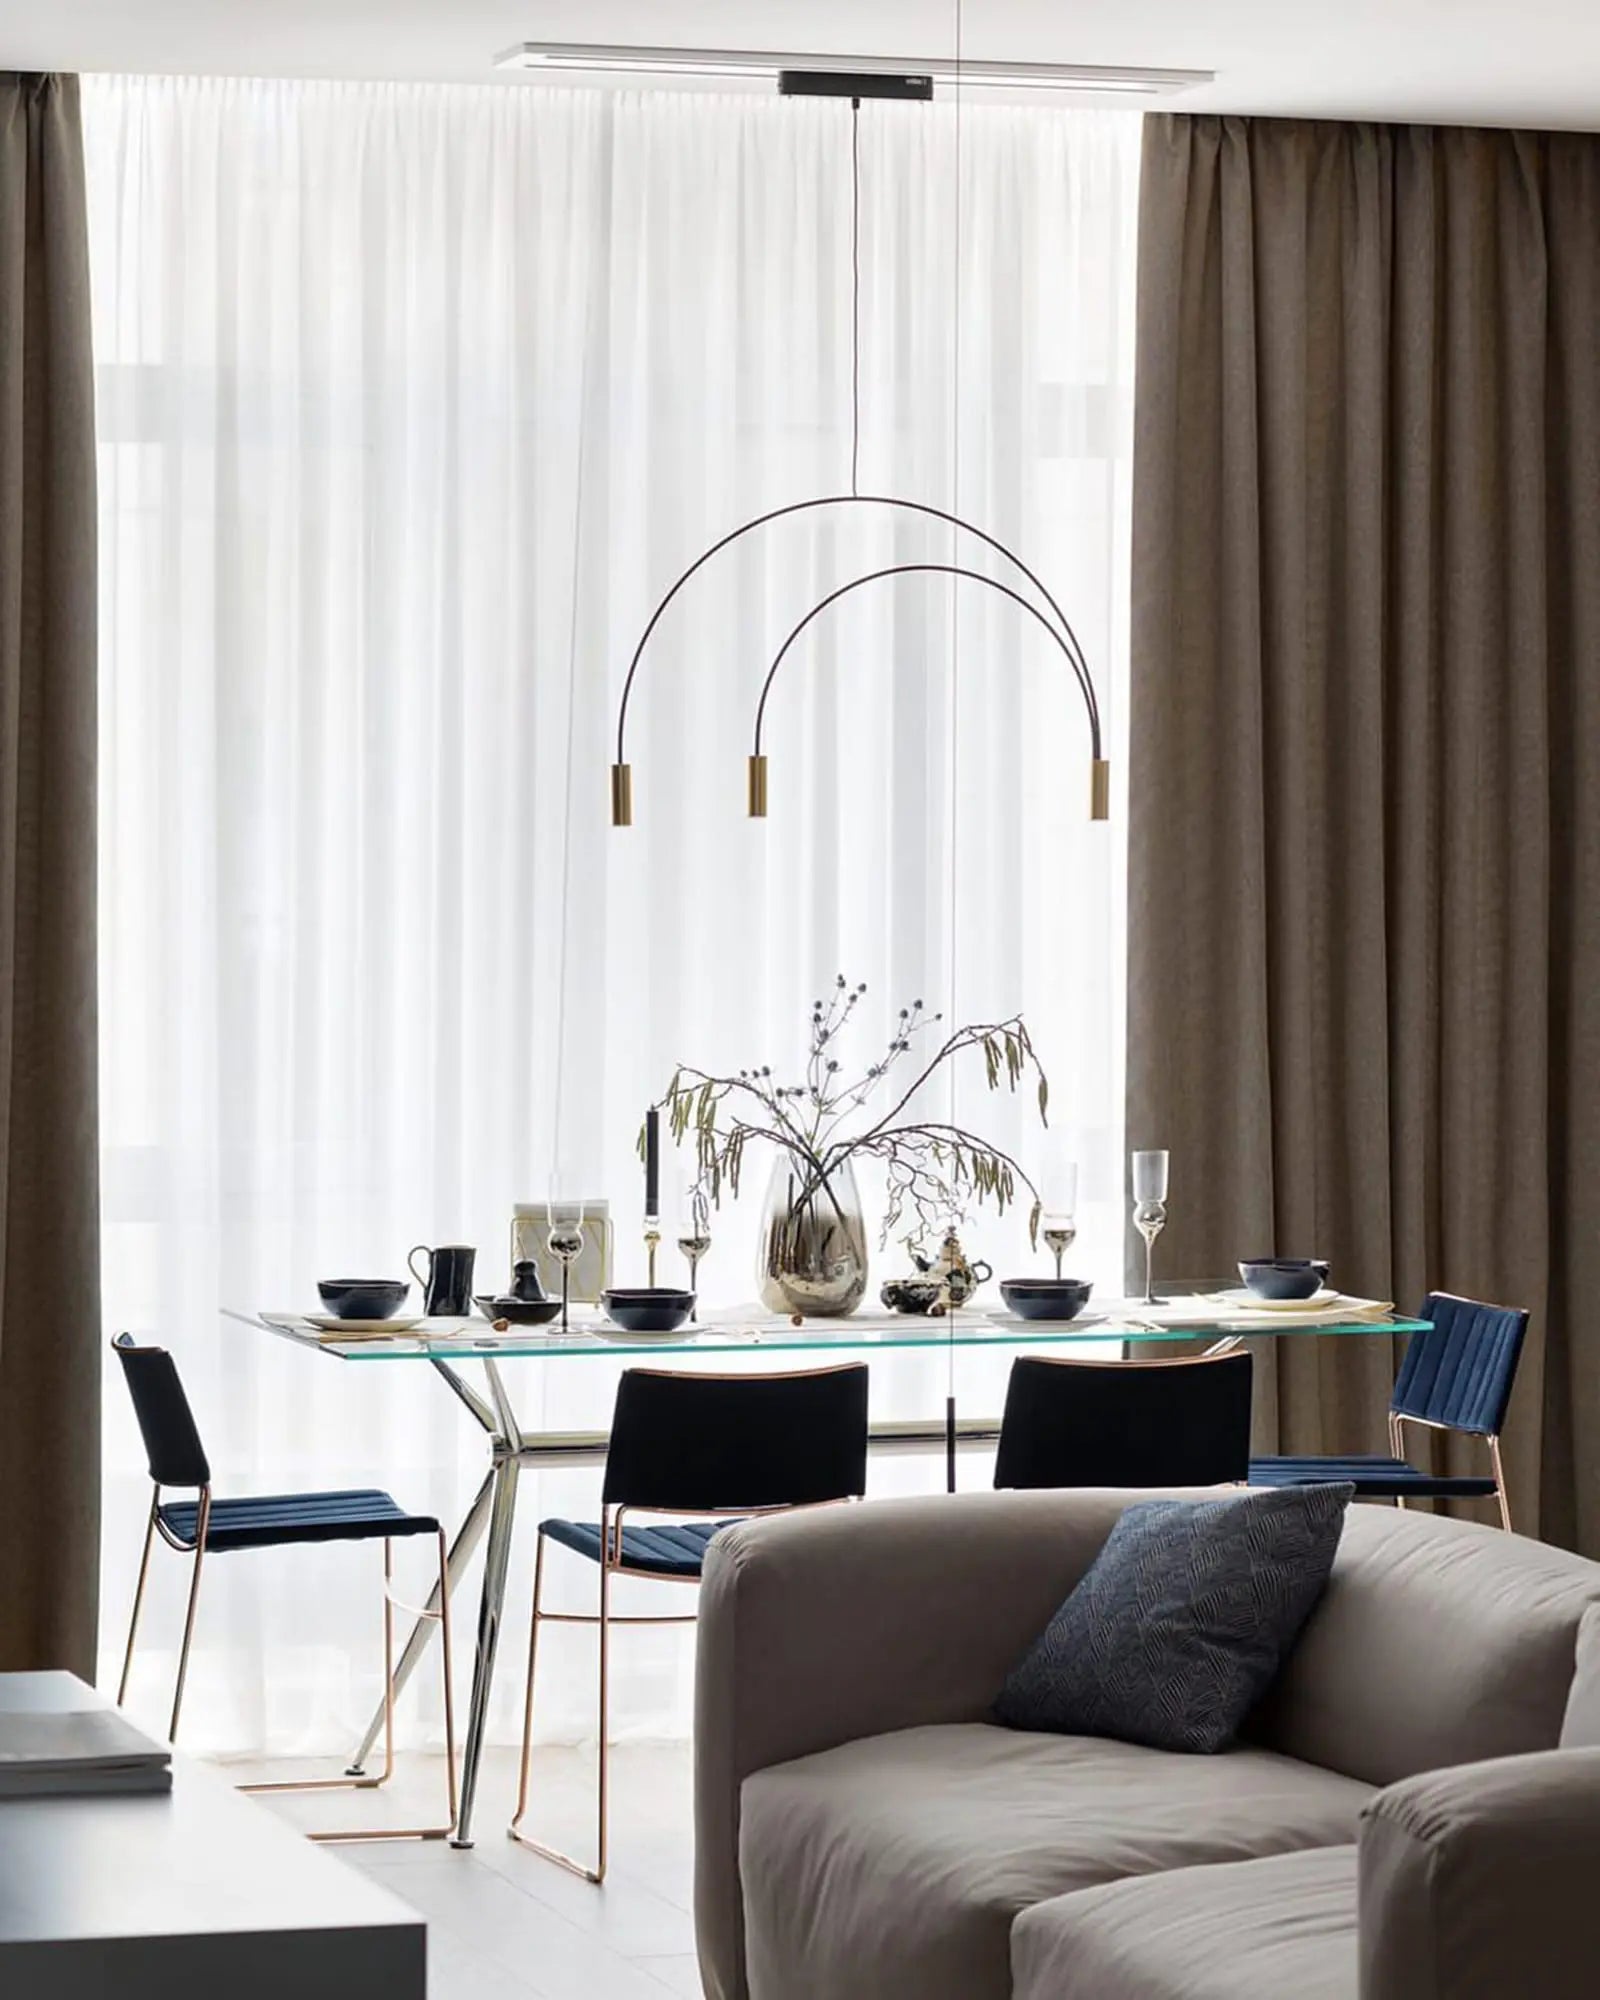 Volta Linear pendant light above a dining table